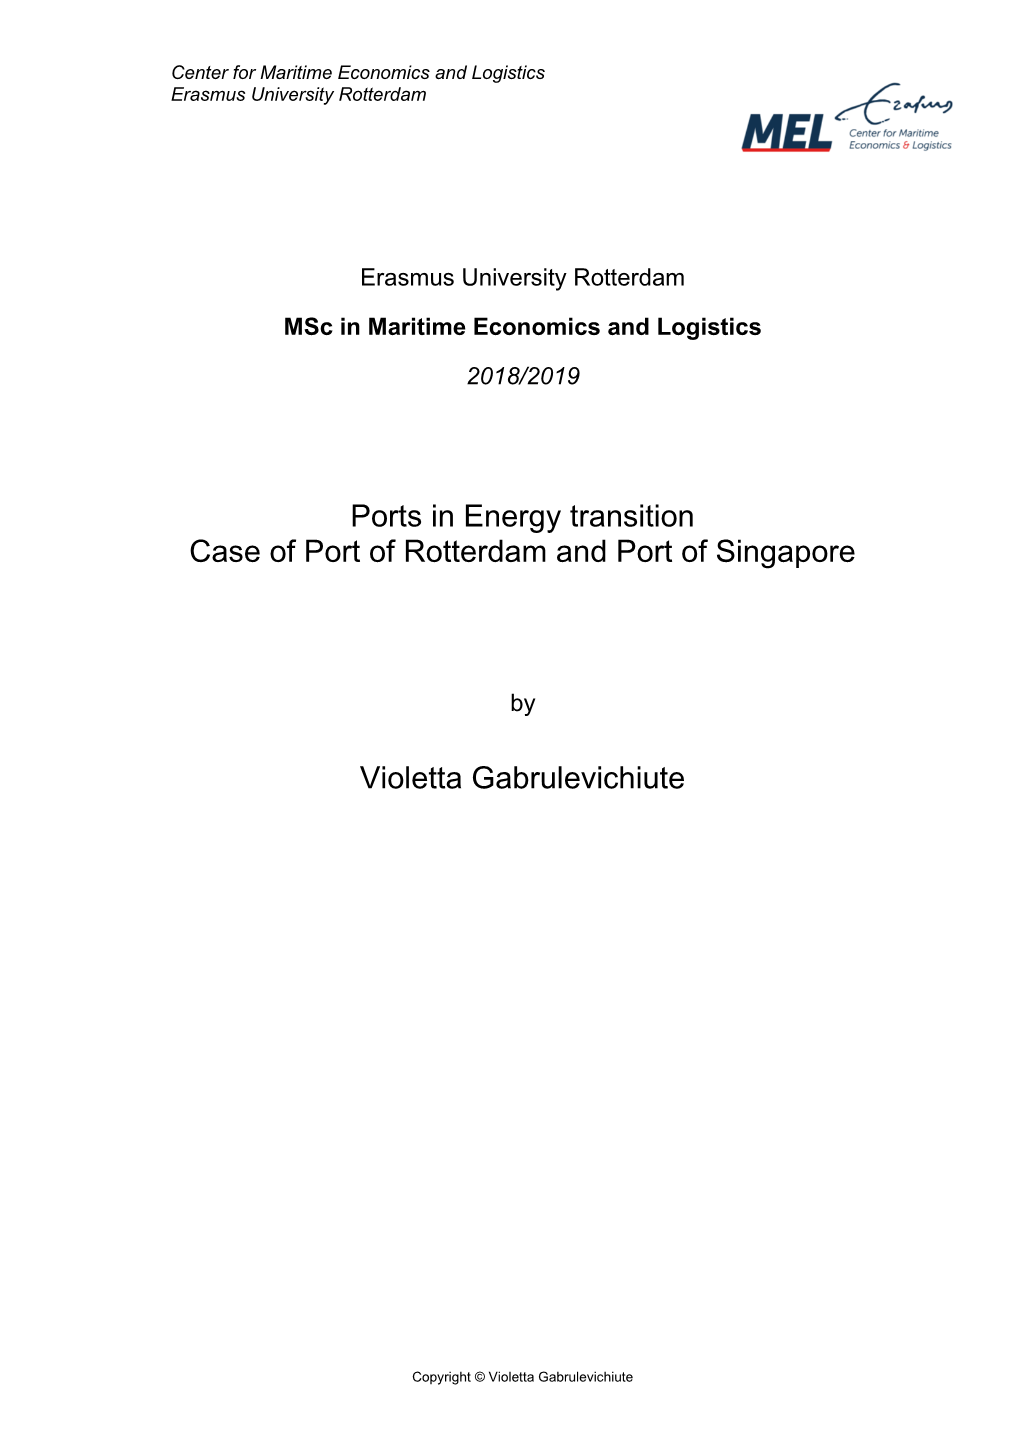 Ports in Energy Transition Case of Port of Rotterdam and Port of Singapore